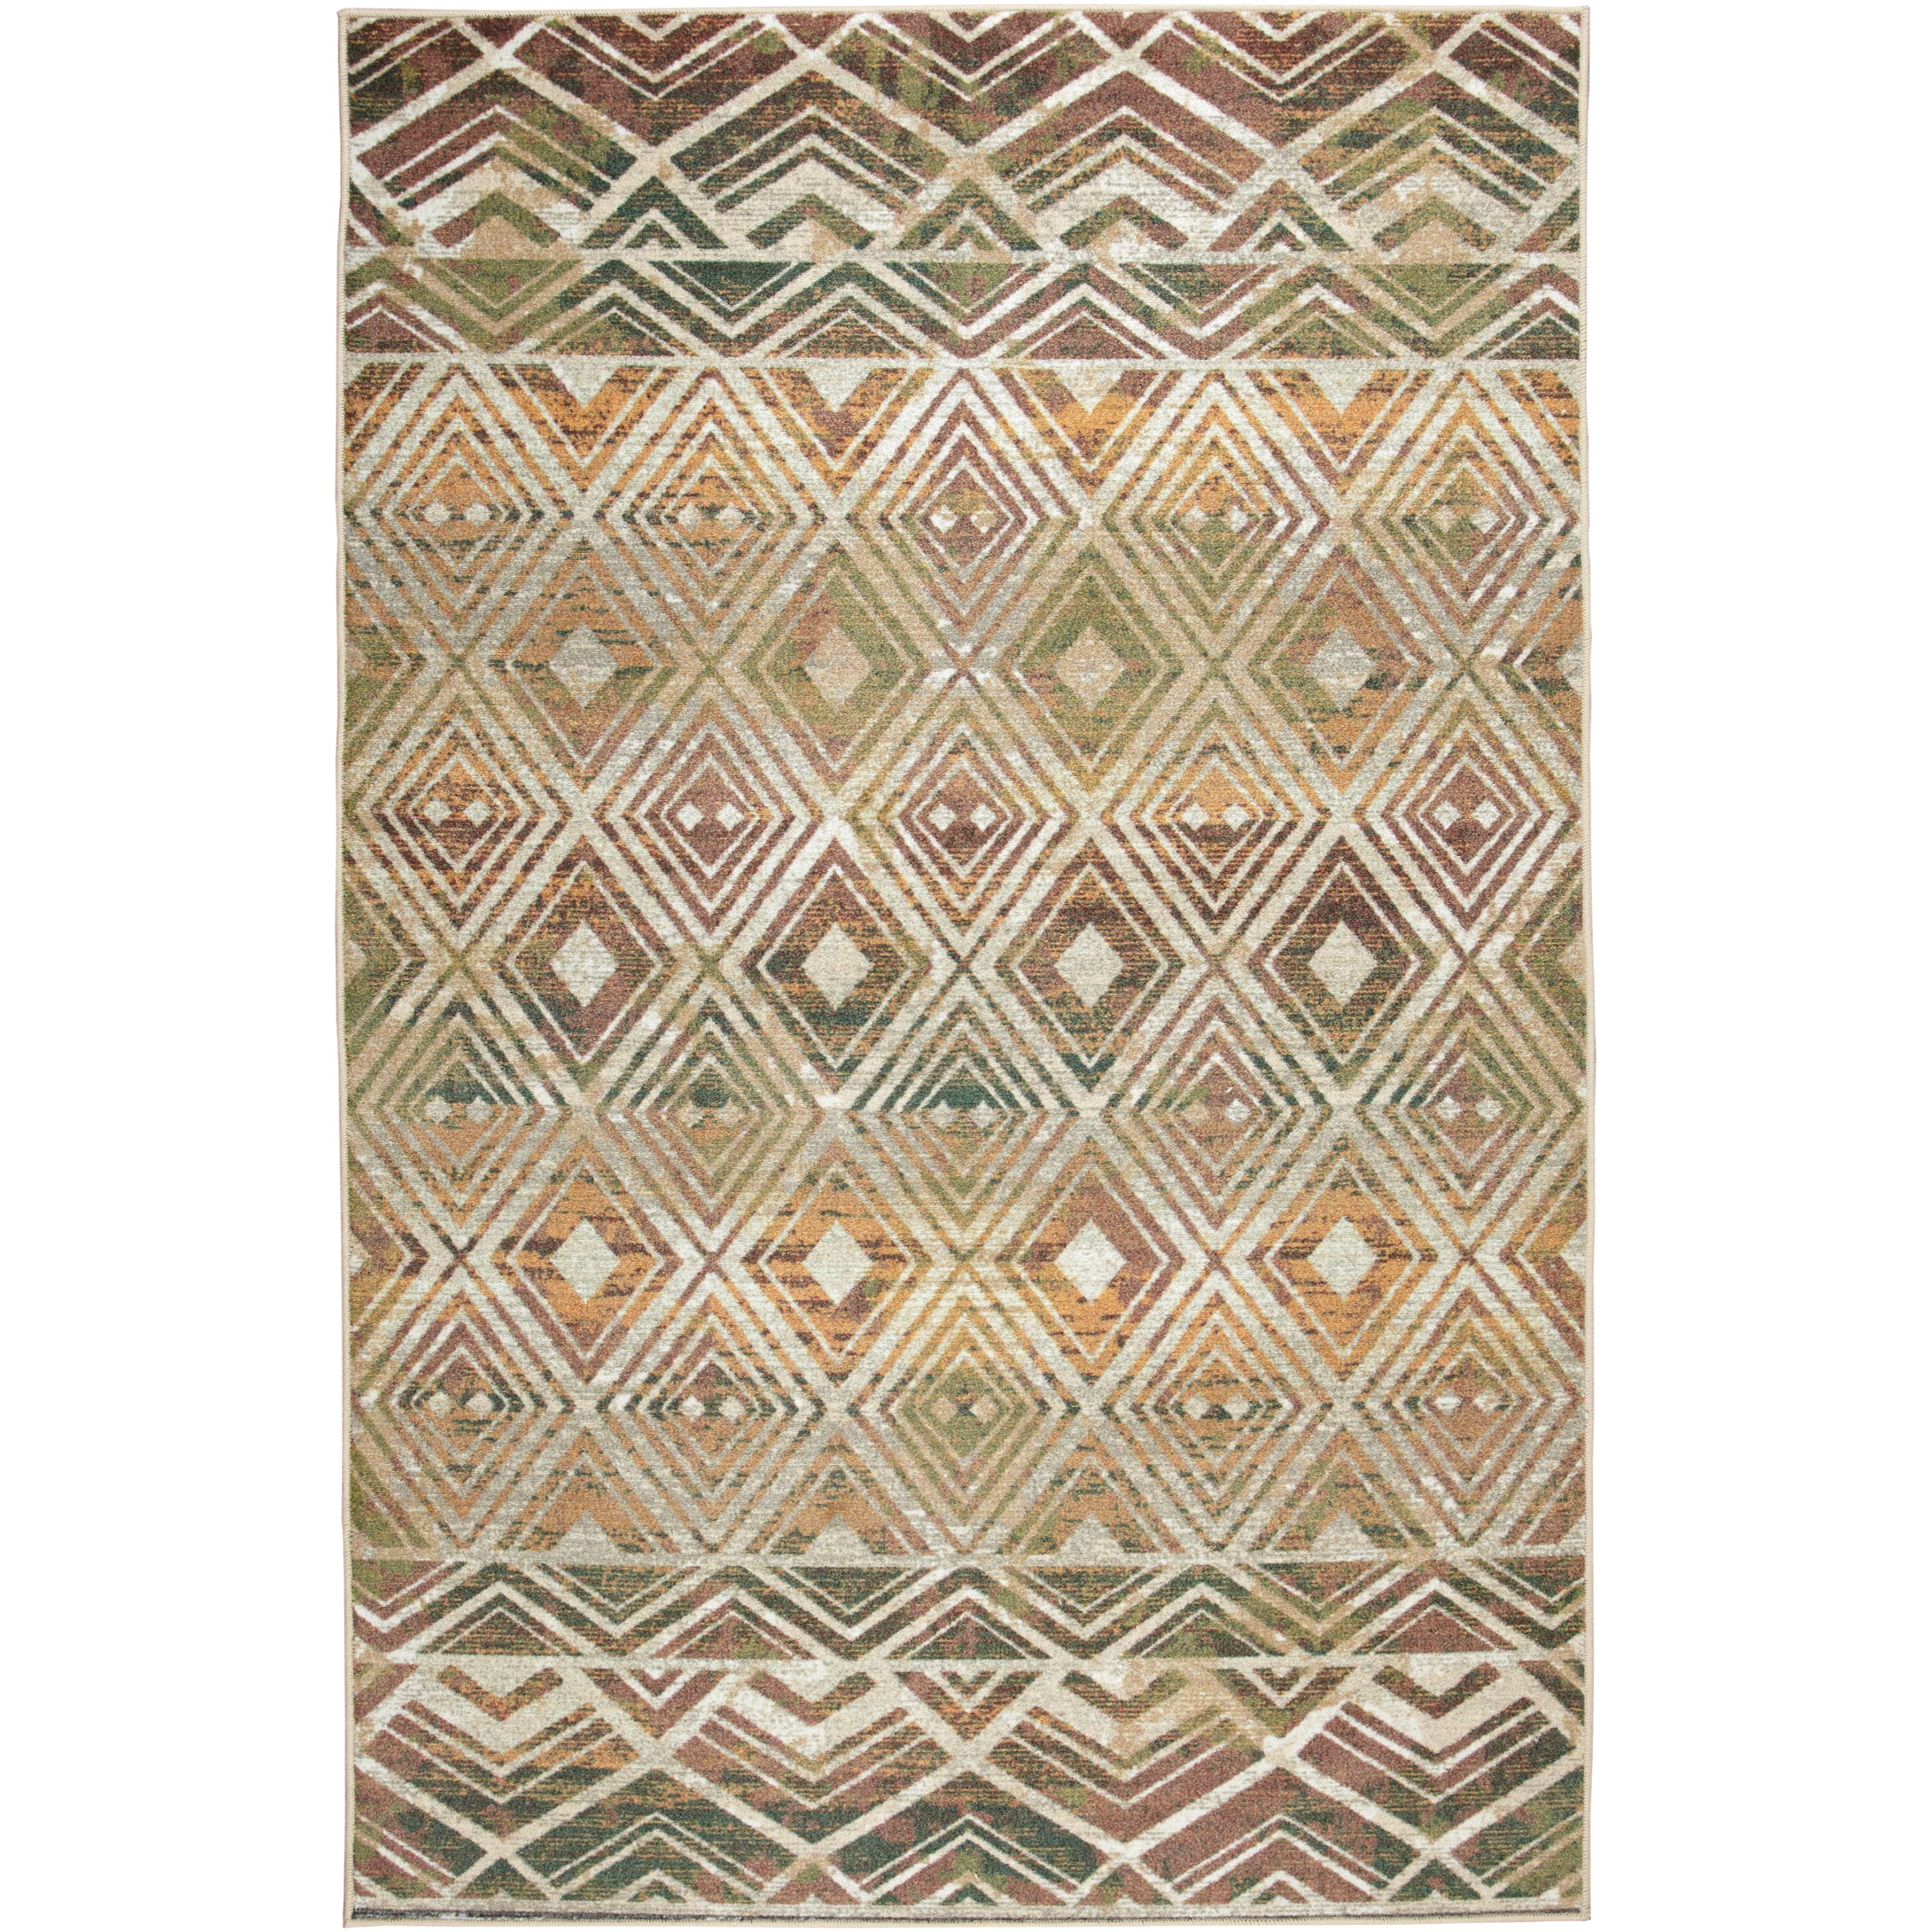 8'x10' Mohawk Home Prismatic Macon Earth Traditional Floral Precision Printed Area Rug Brown